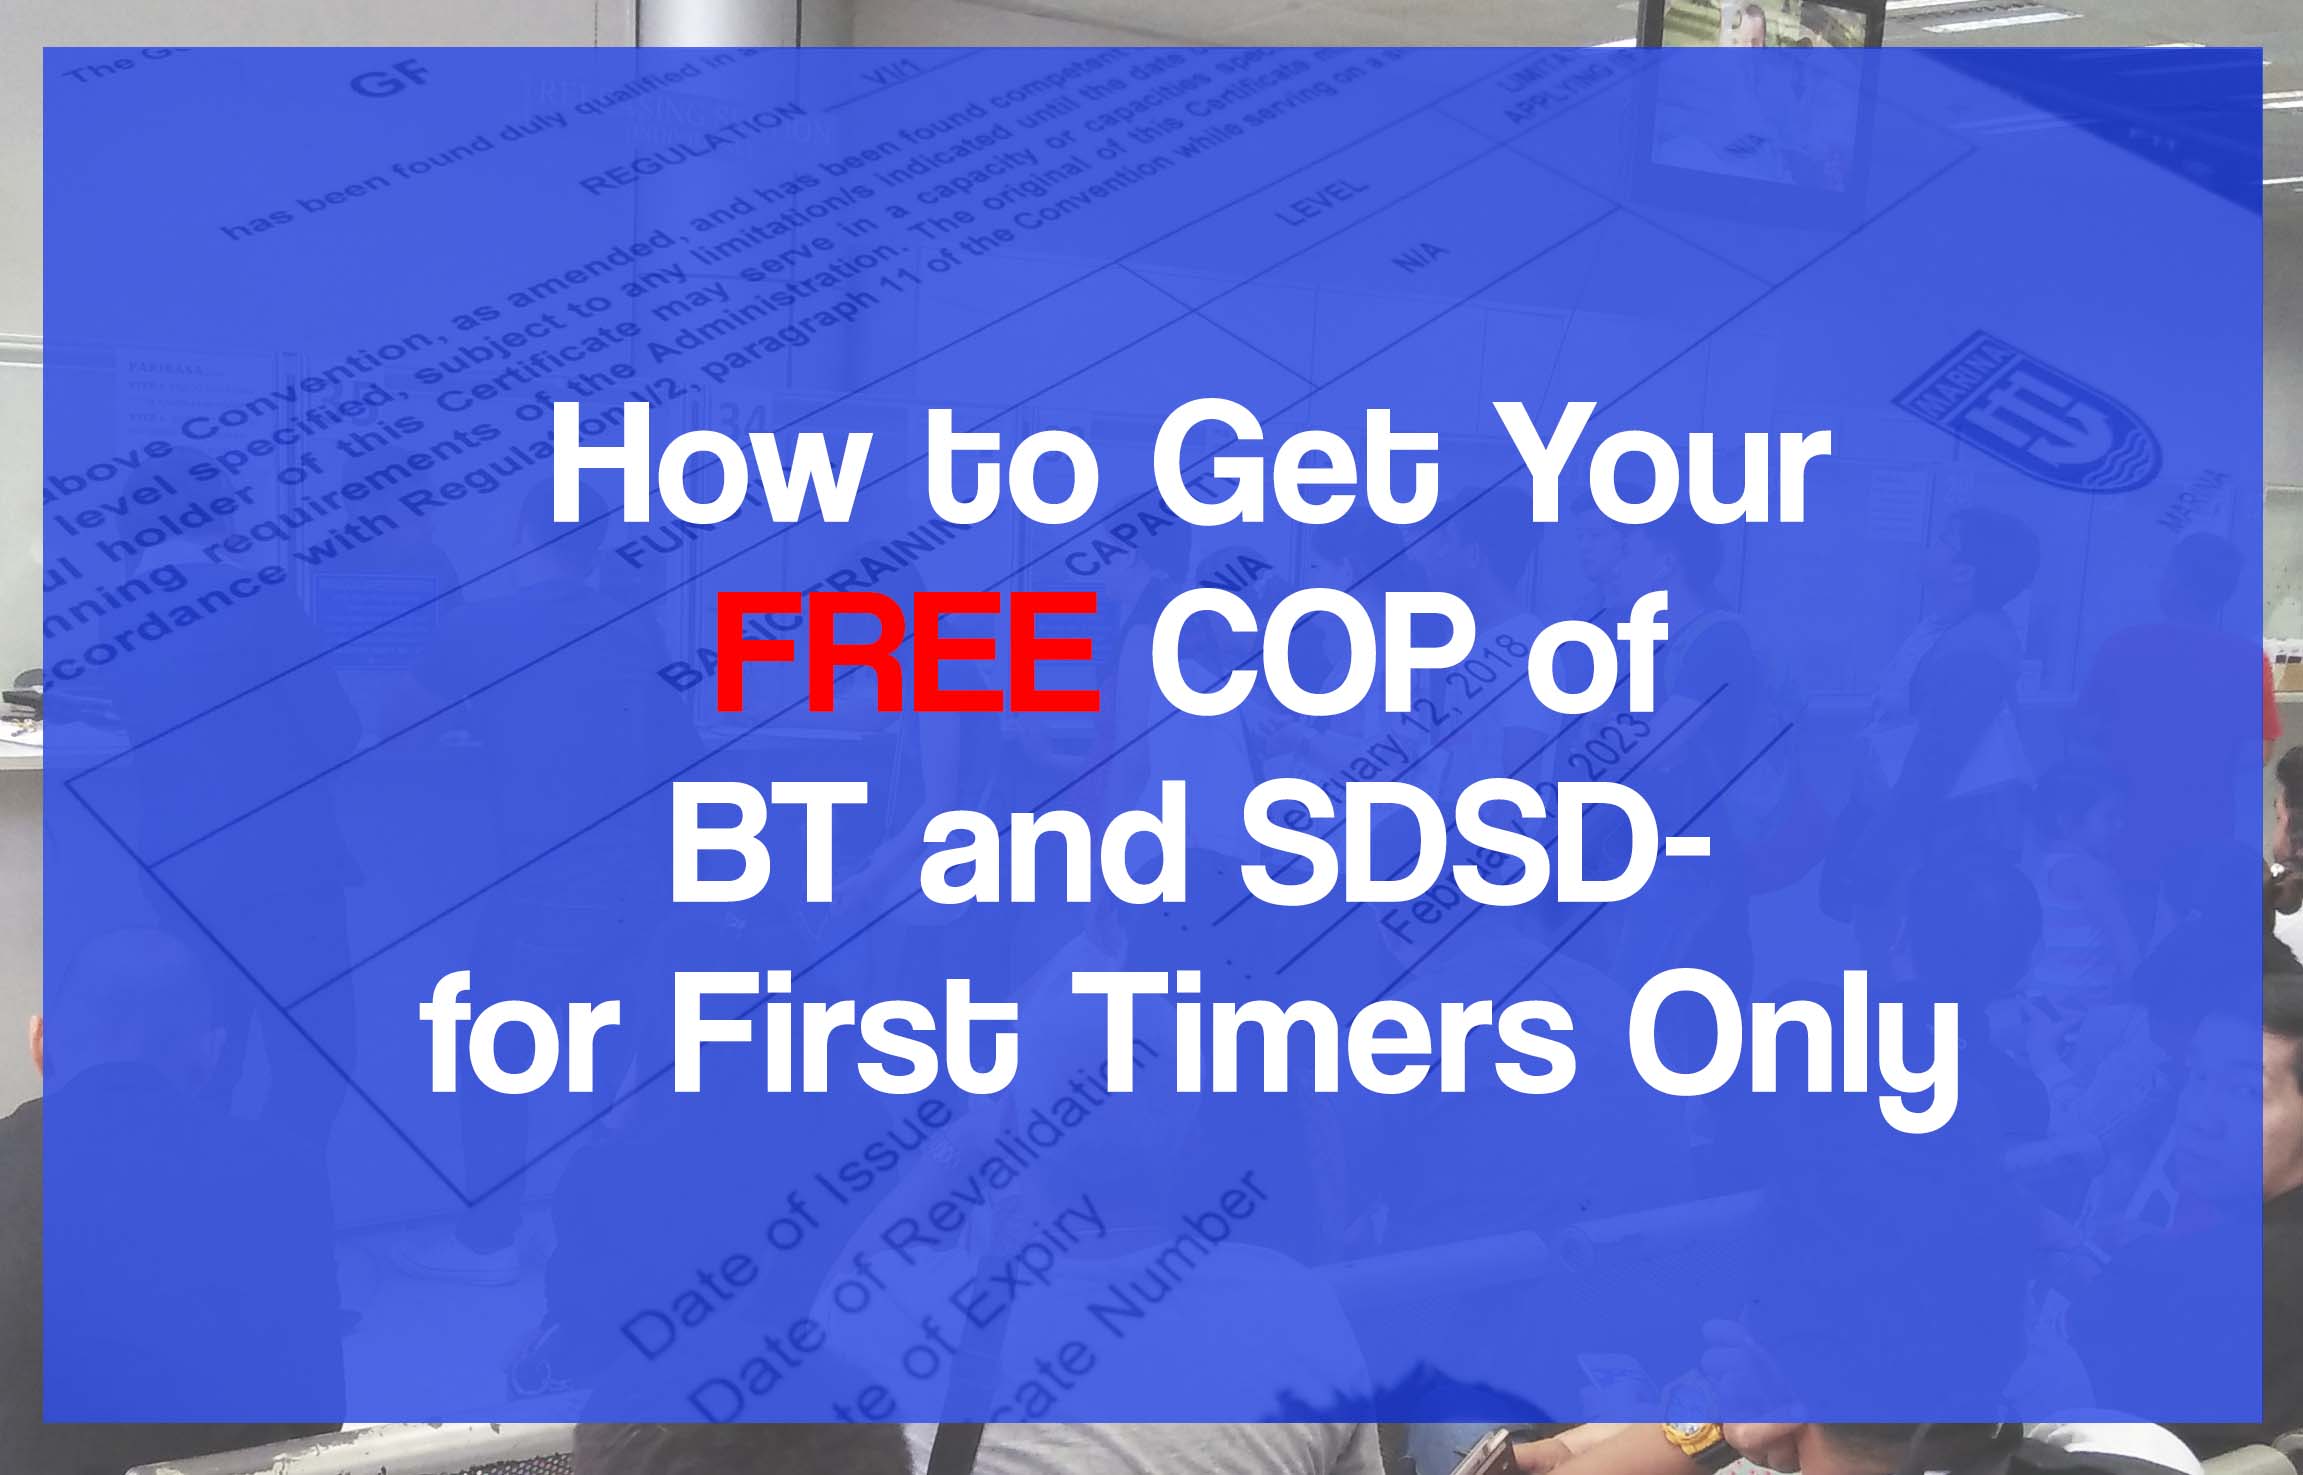 Featured image of the article "Free COP of BT and SDSD" with a sample COP at the background.